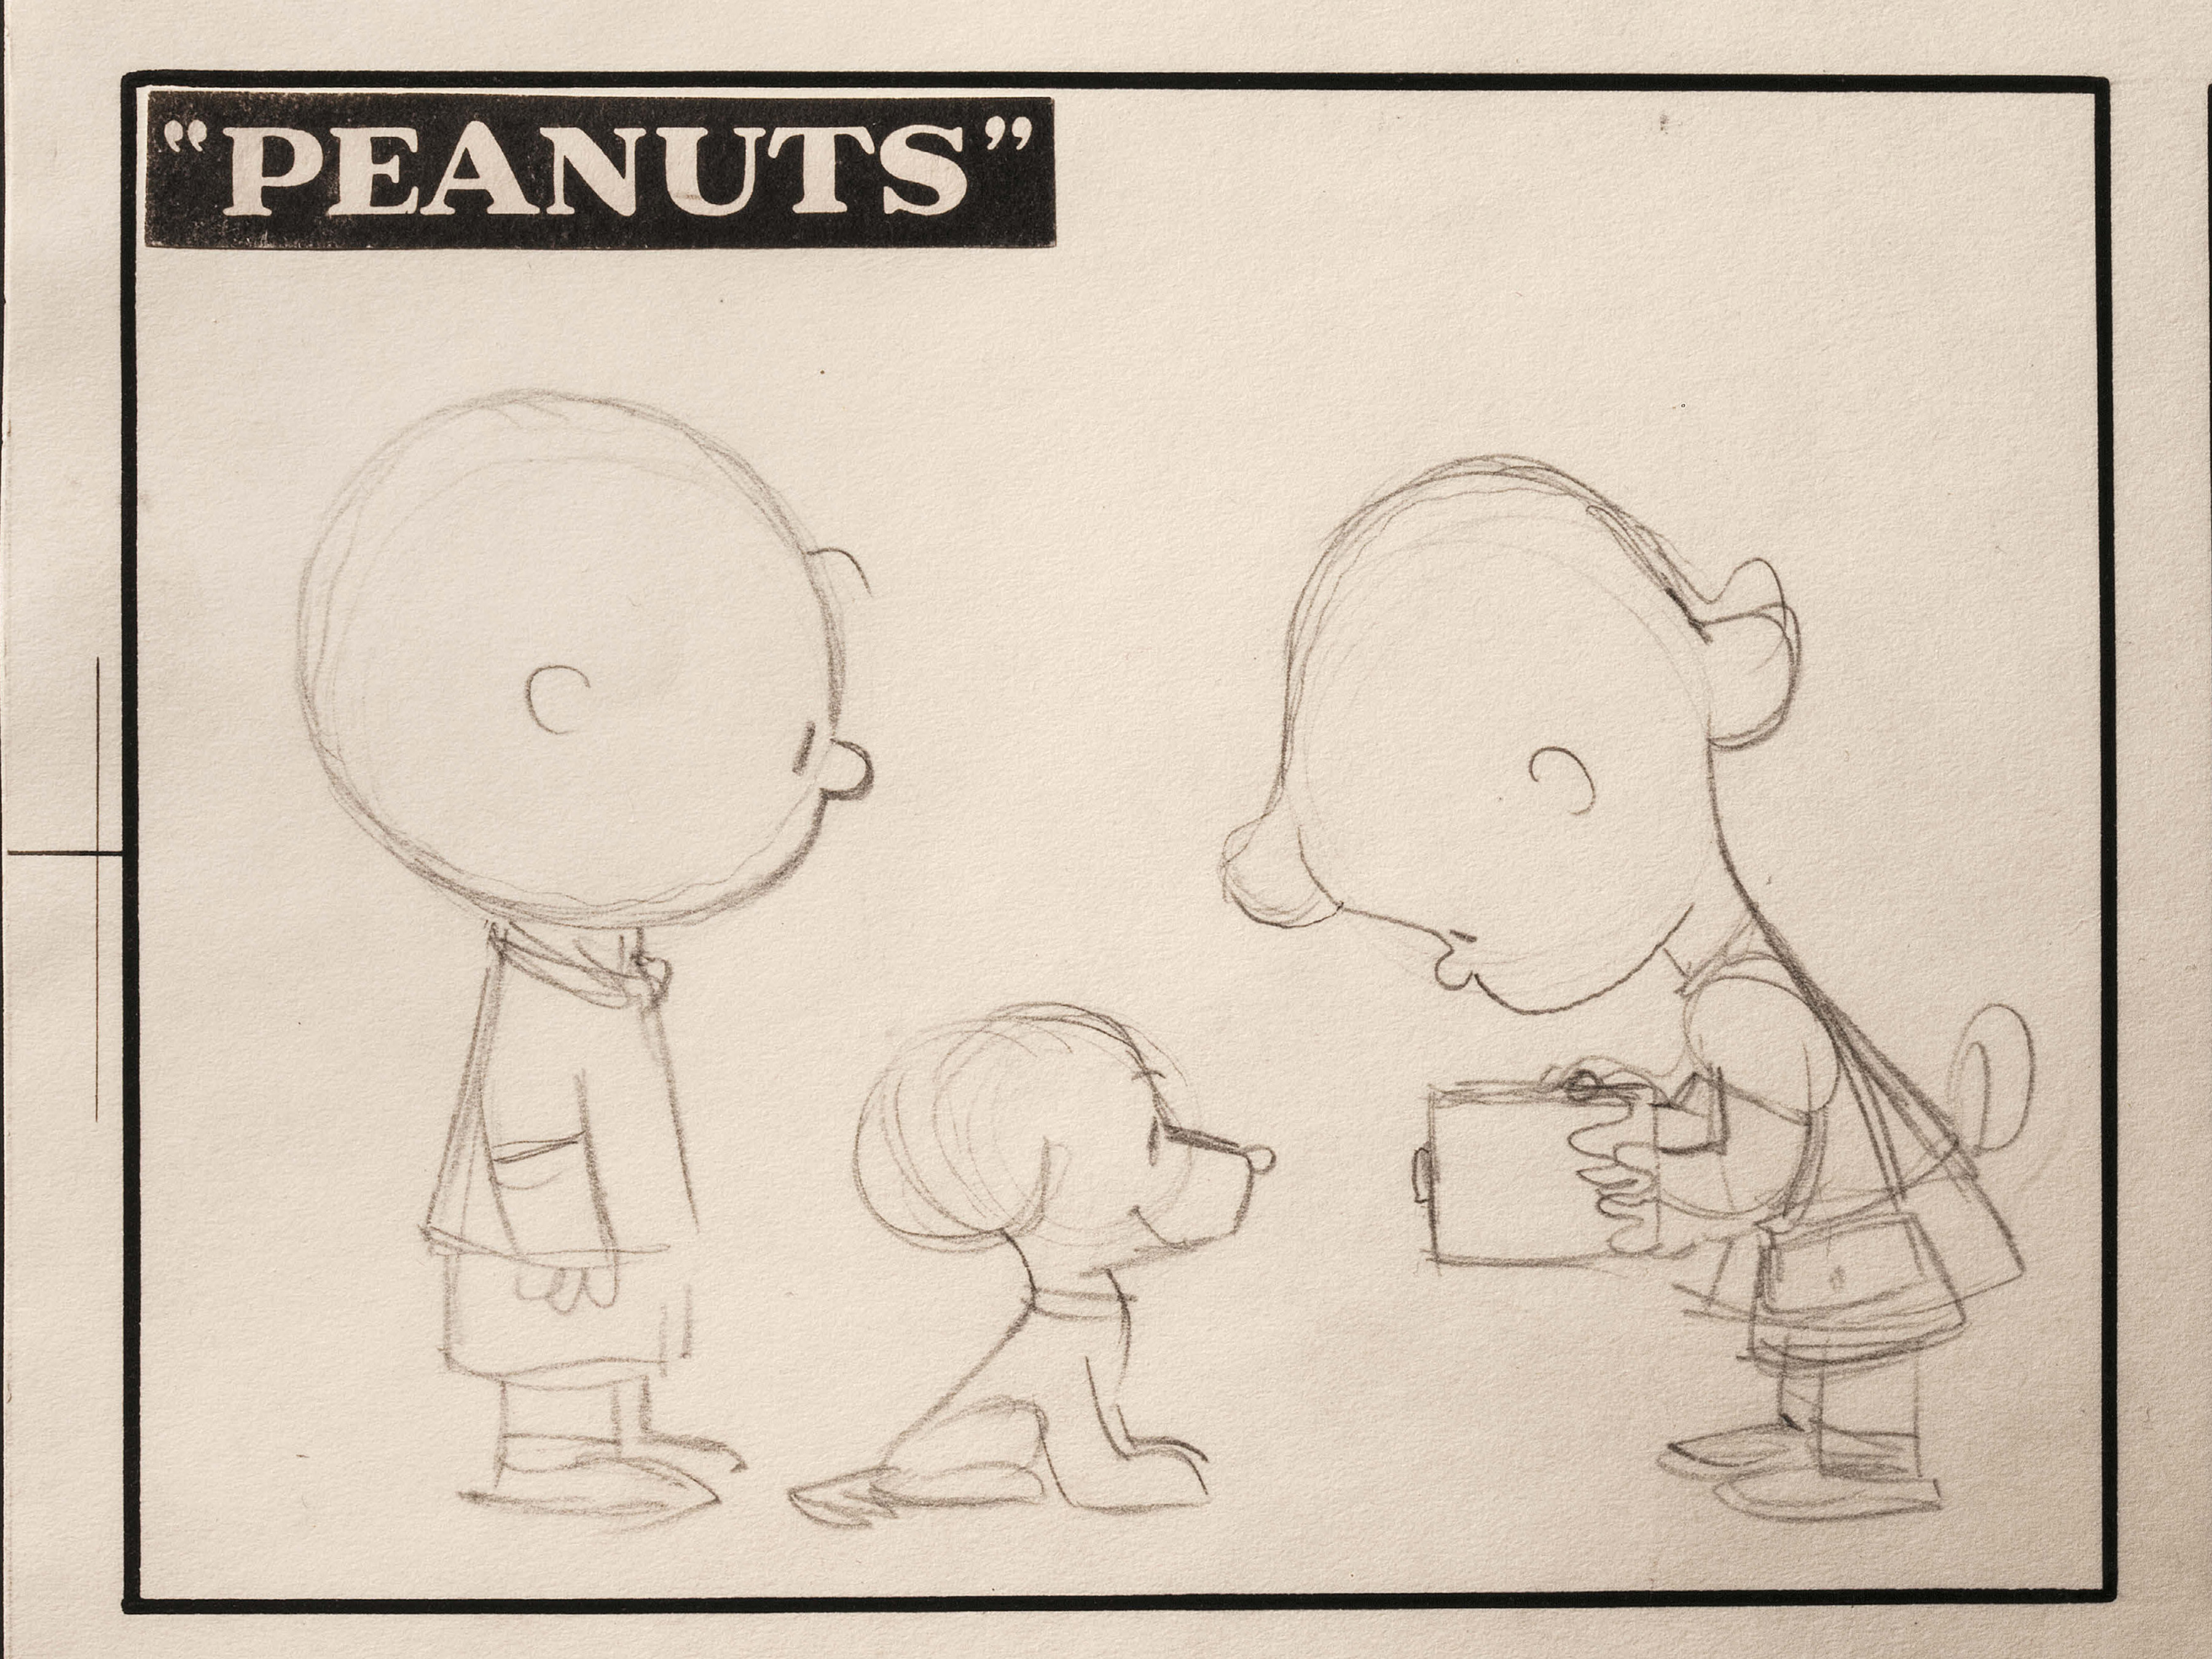 Read online Only What's Necessary: Charles M. Schulz and the Art of Peanuts comic -  Issue # TPB (Part 2) - 12